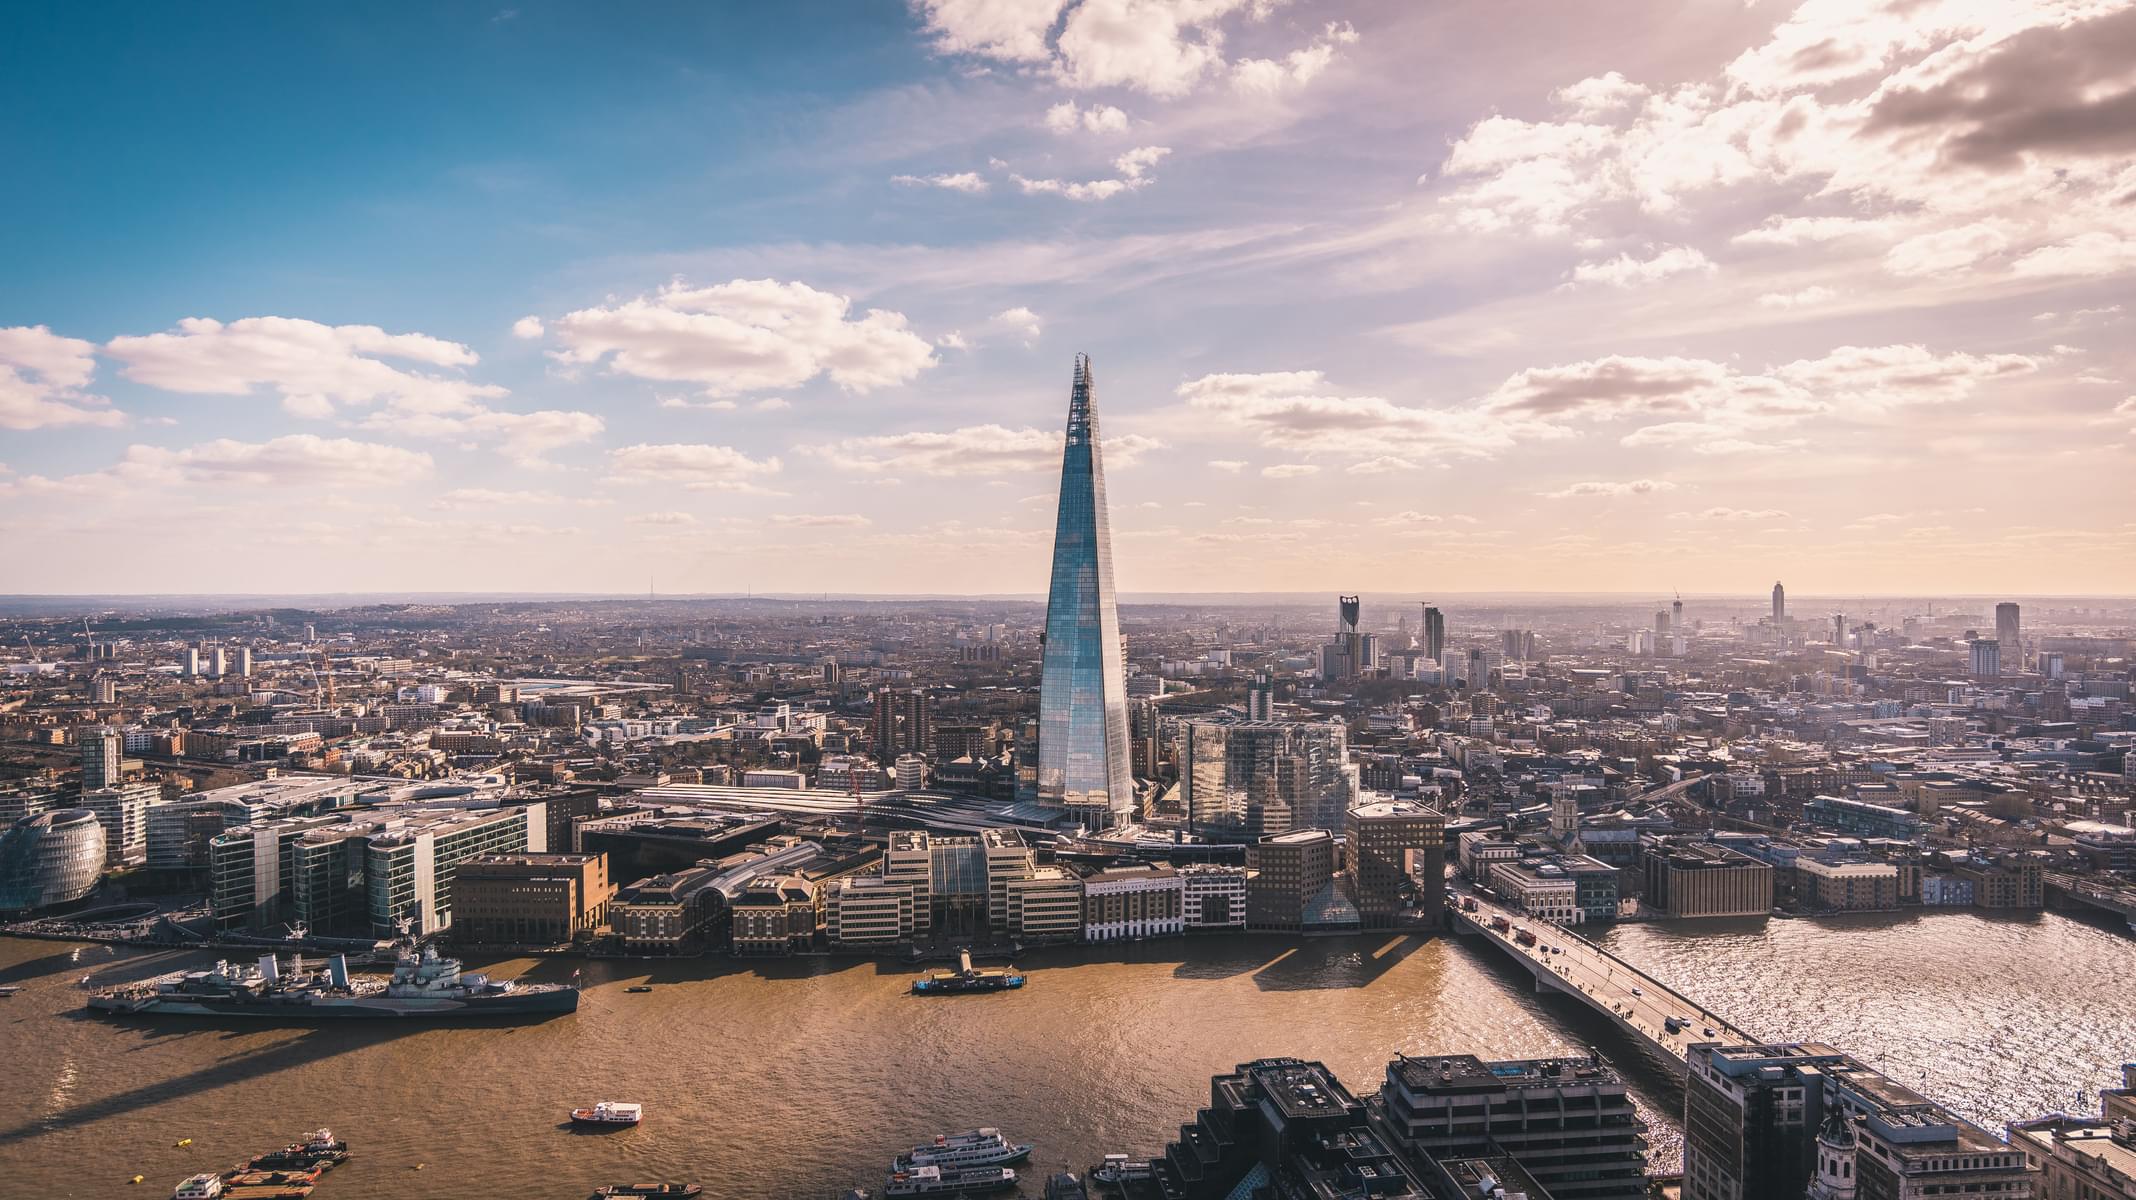 What To Expect In The View from The Shard?